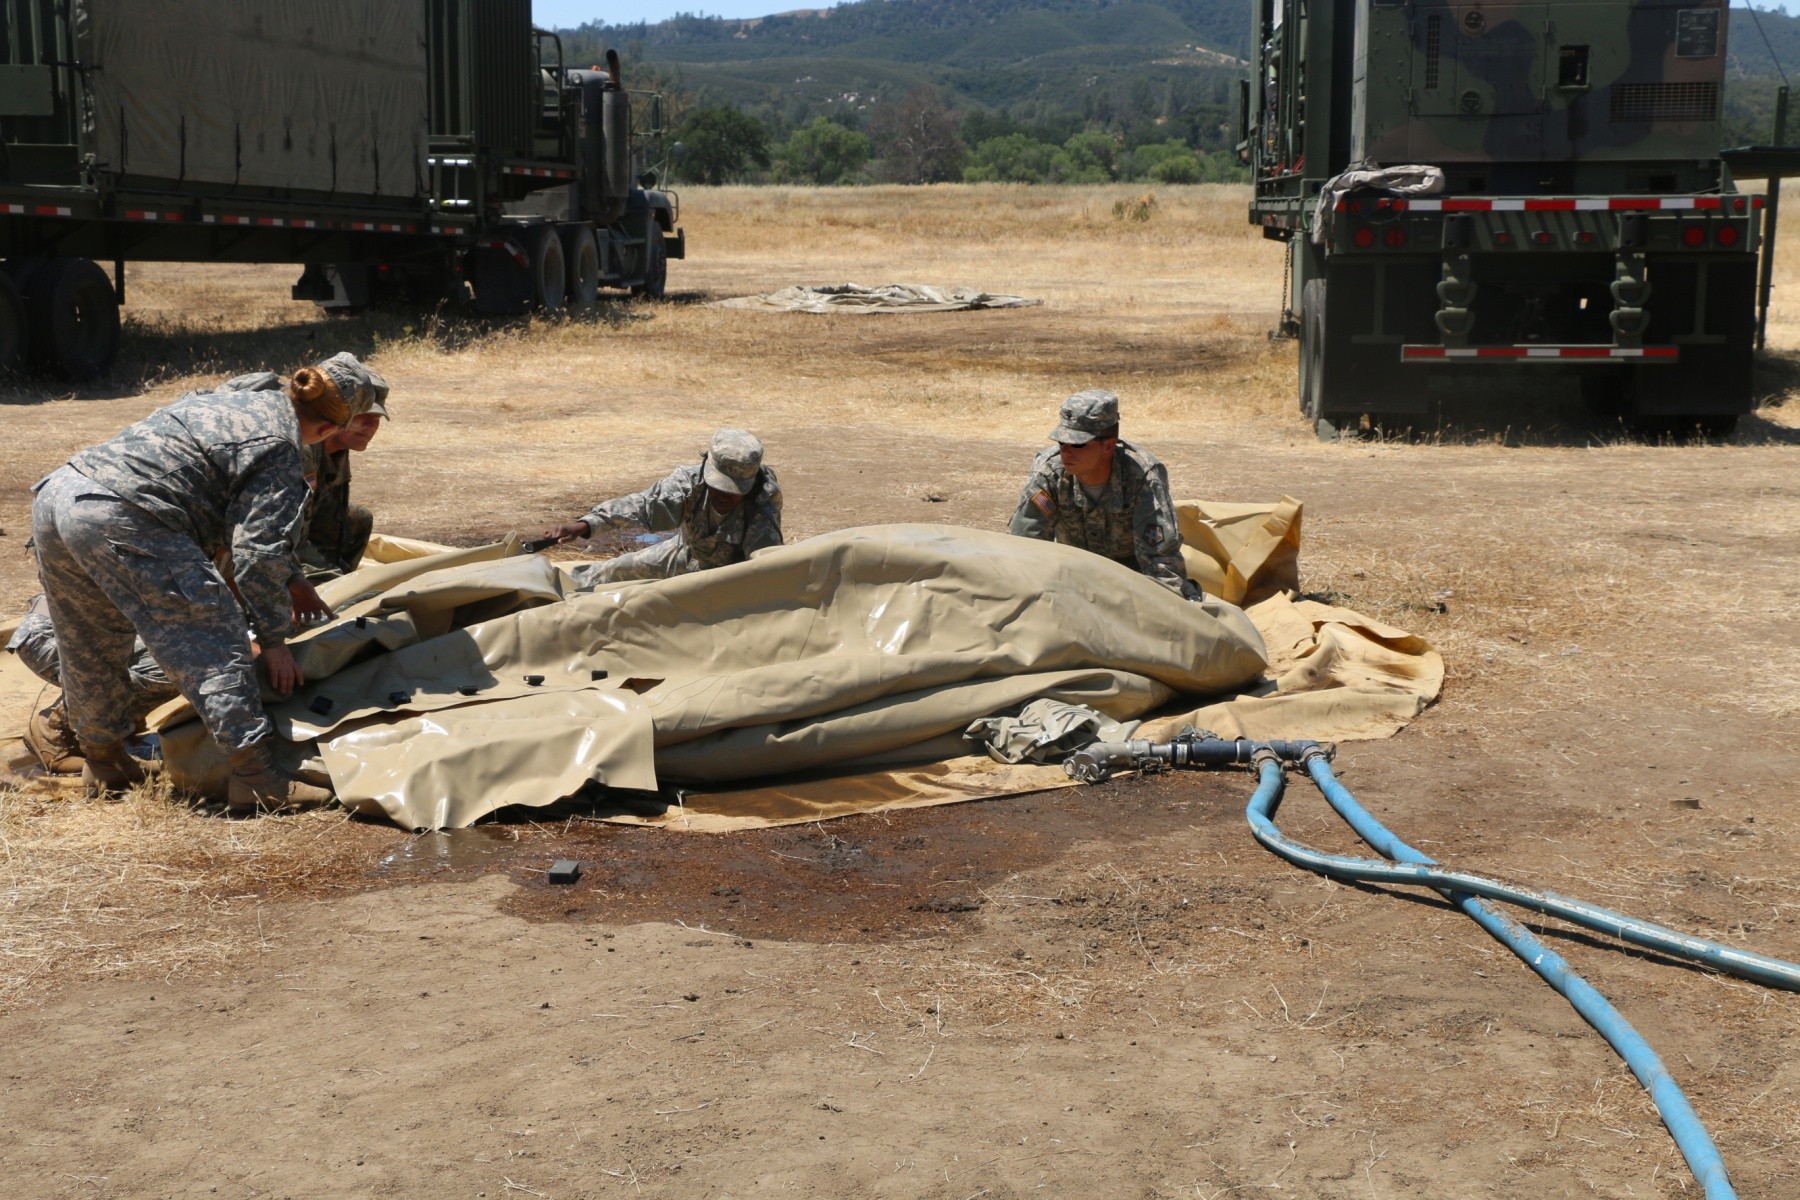 275th Quartermaster Company Soldiers staying tactically and